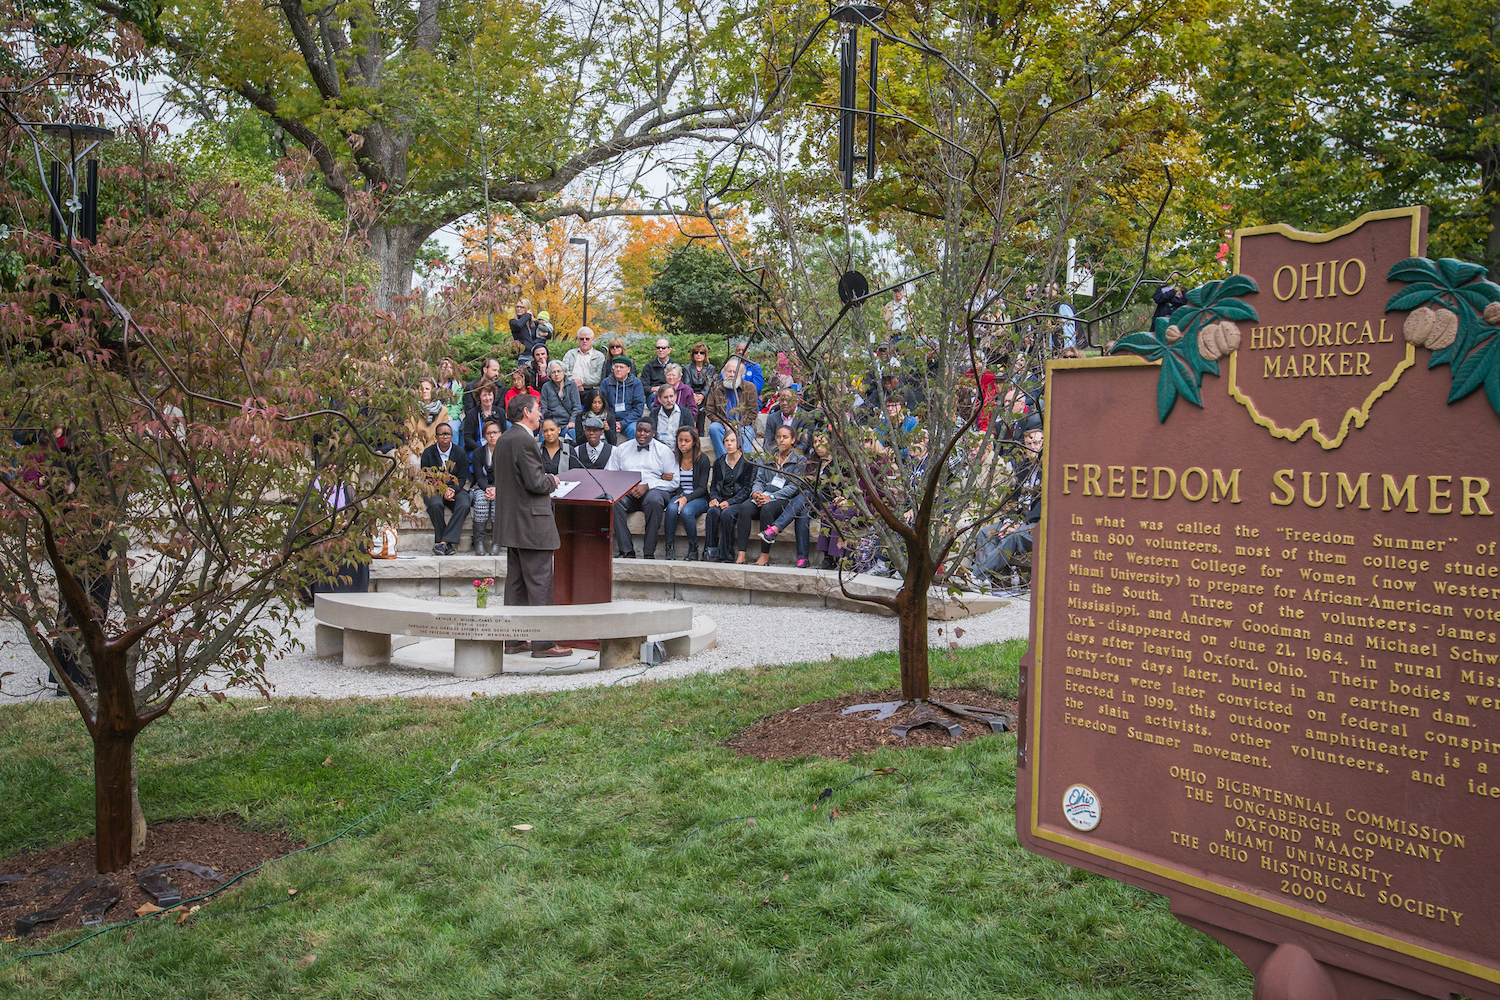 Freedom Summer Memorial and people